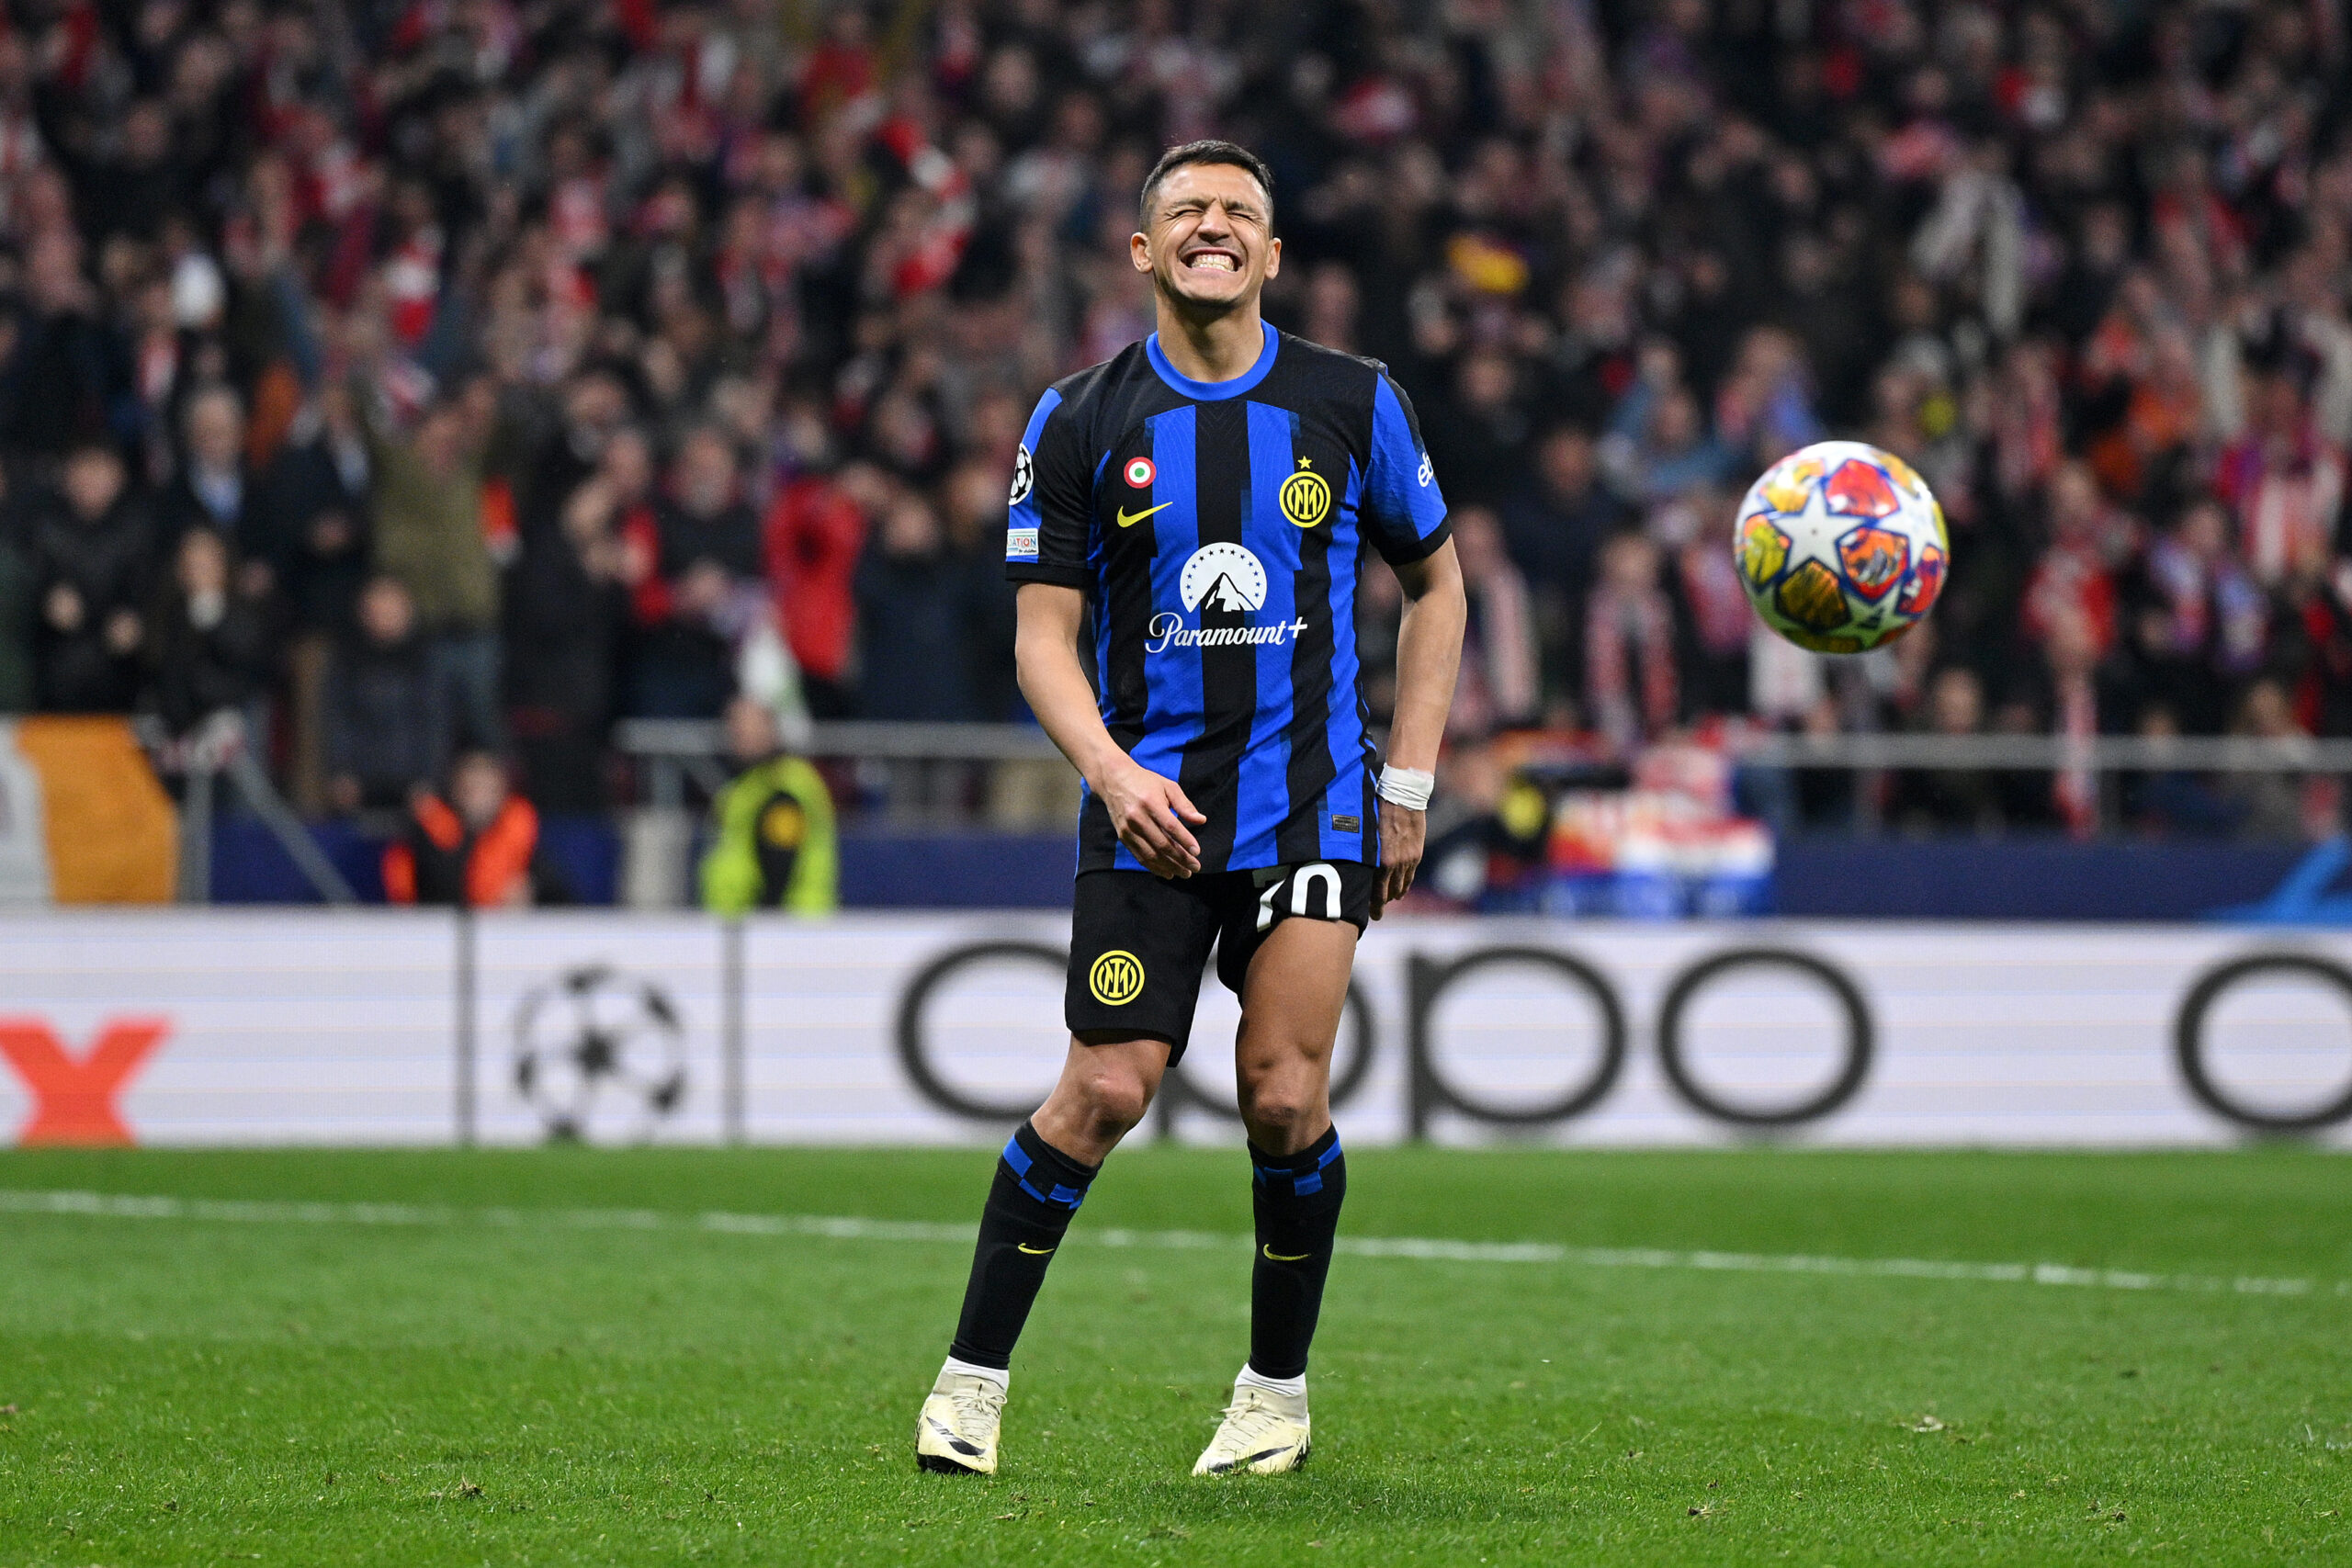 Inter bowed out on PKs against Atletico Madrid after a hard-fought contest where their lead was nullified. The outcome of the shoot-out wasn’t stunning.